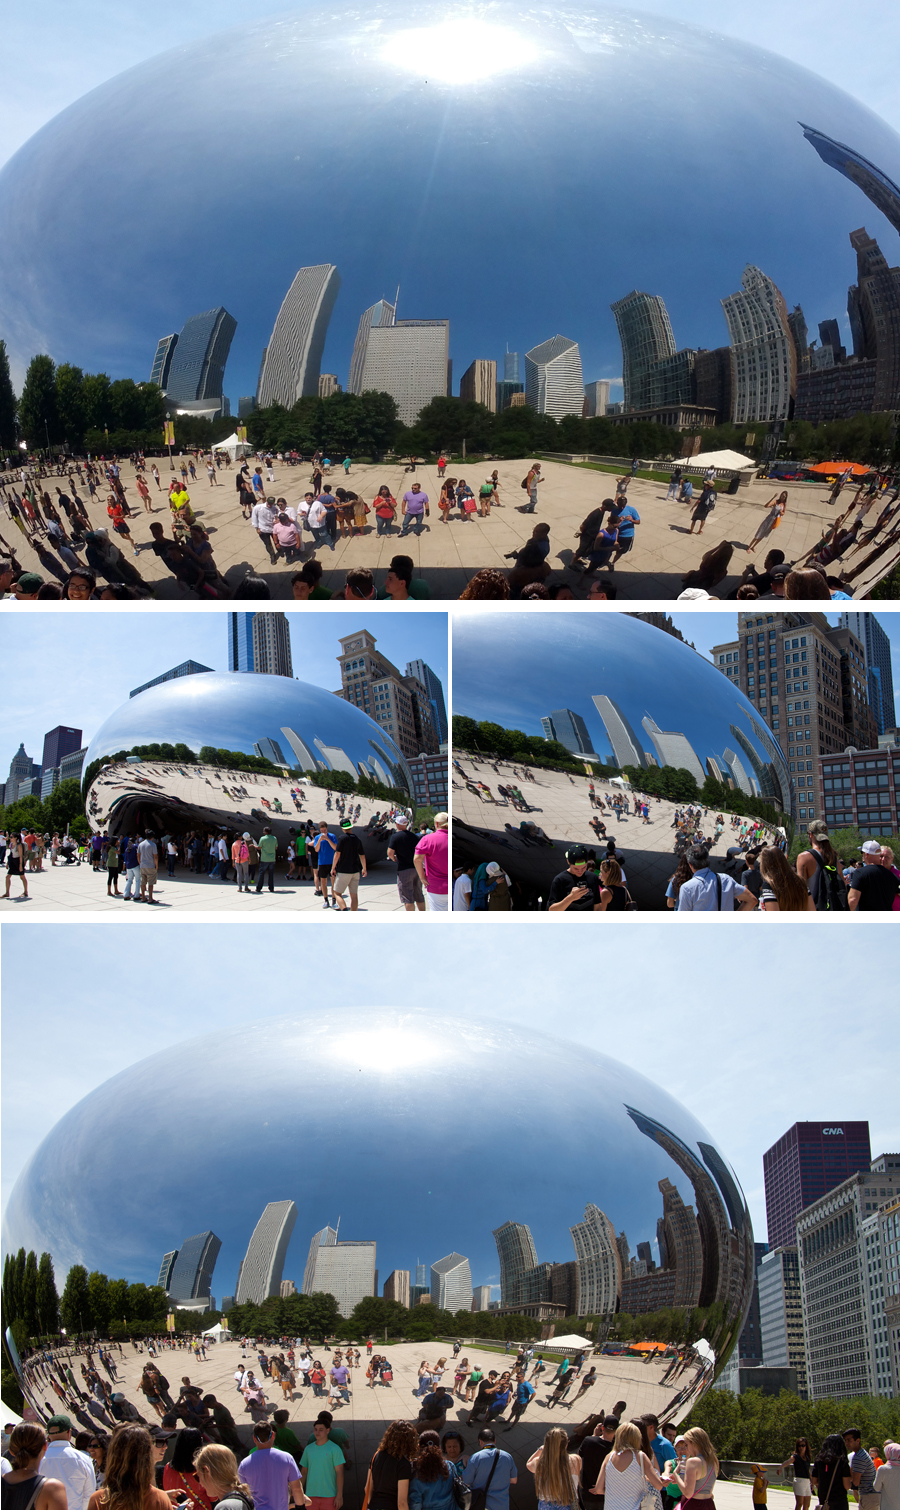 thebeancloudgate